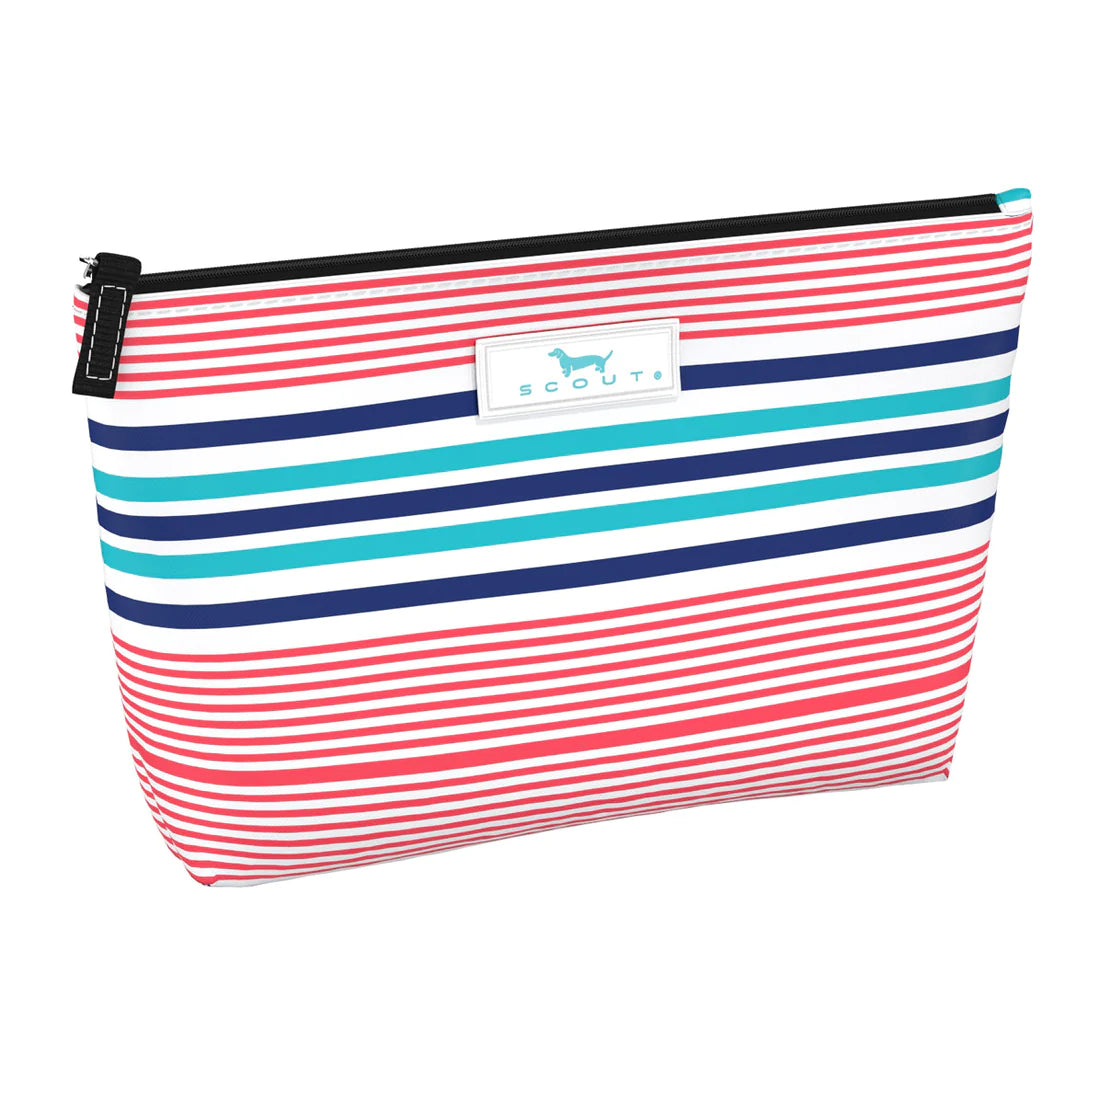 Scout Twiggy Makeup Bag - What The Deck